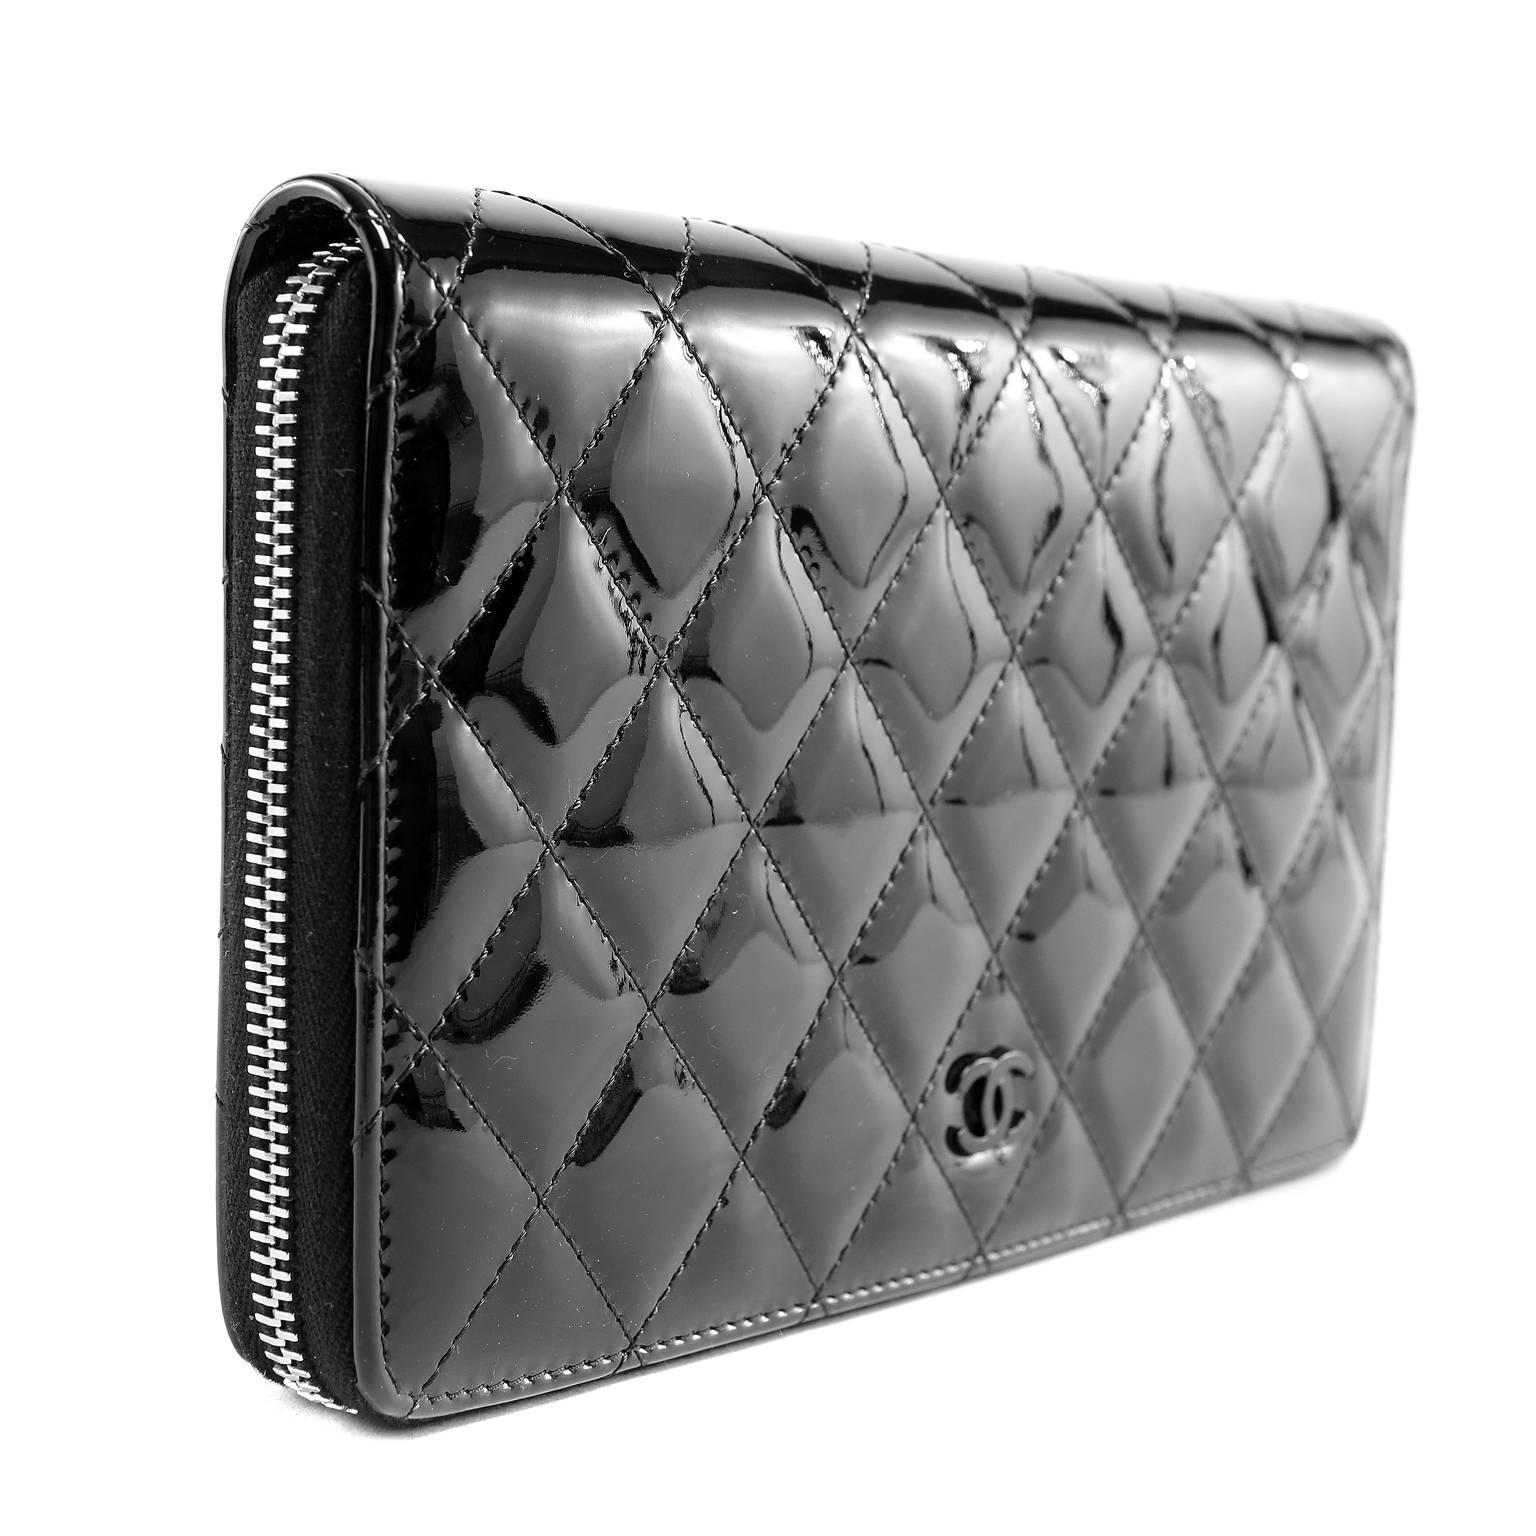 Chanel Black Patent Leather Zip Around Wallet- PRISTINE unworn
  Designed to organize the maximum number of cards, currency and various receipts, this attractive wallet is also extremely practical. 
 
Durable black patent leather large wallet is